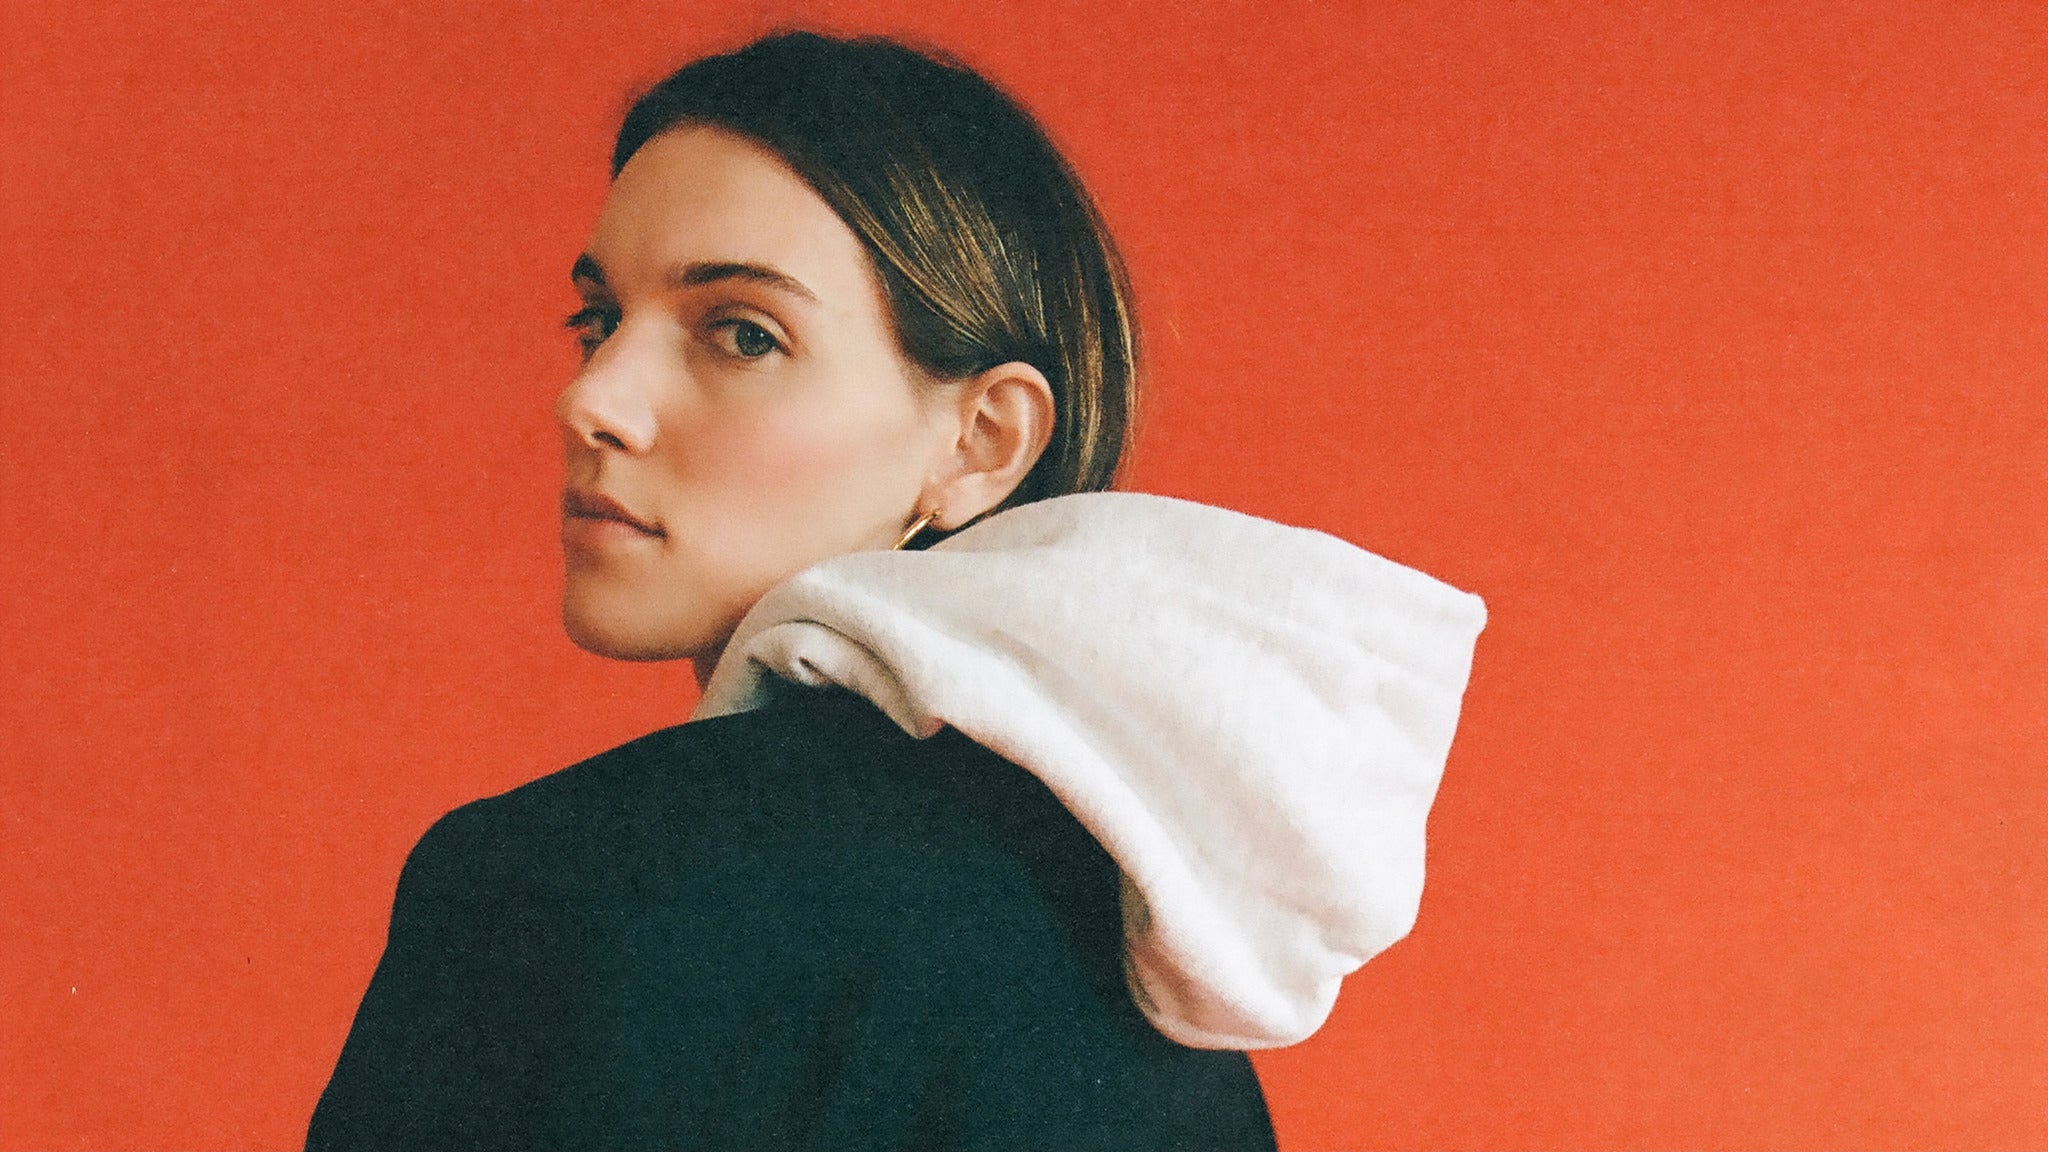 Charlotte Cardin - Phoenix North American Tour presale code for early tickets in Toronto